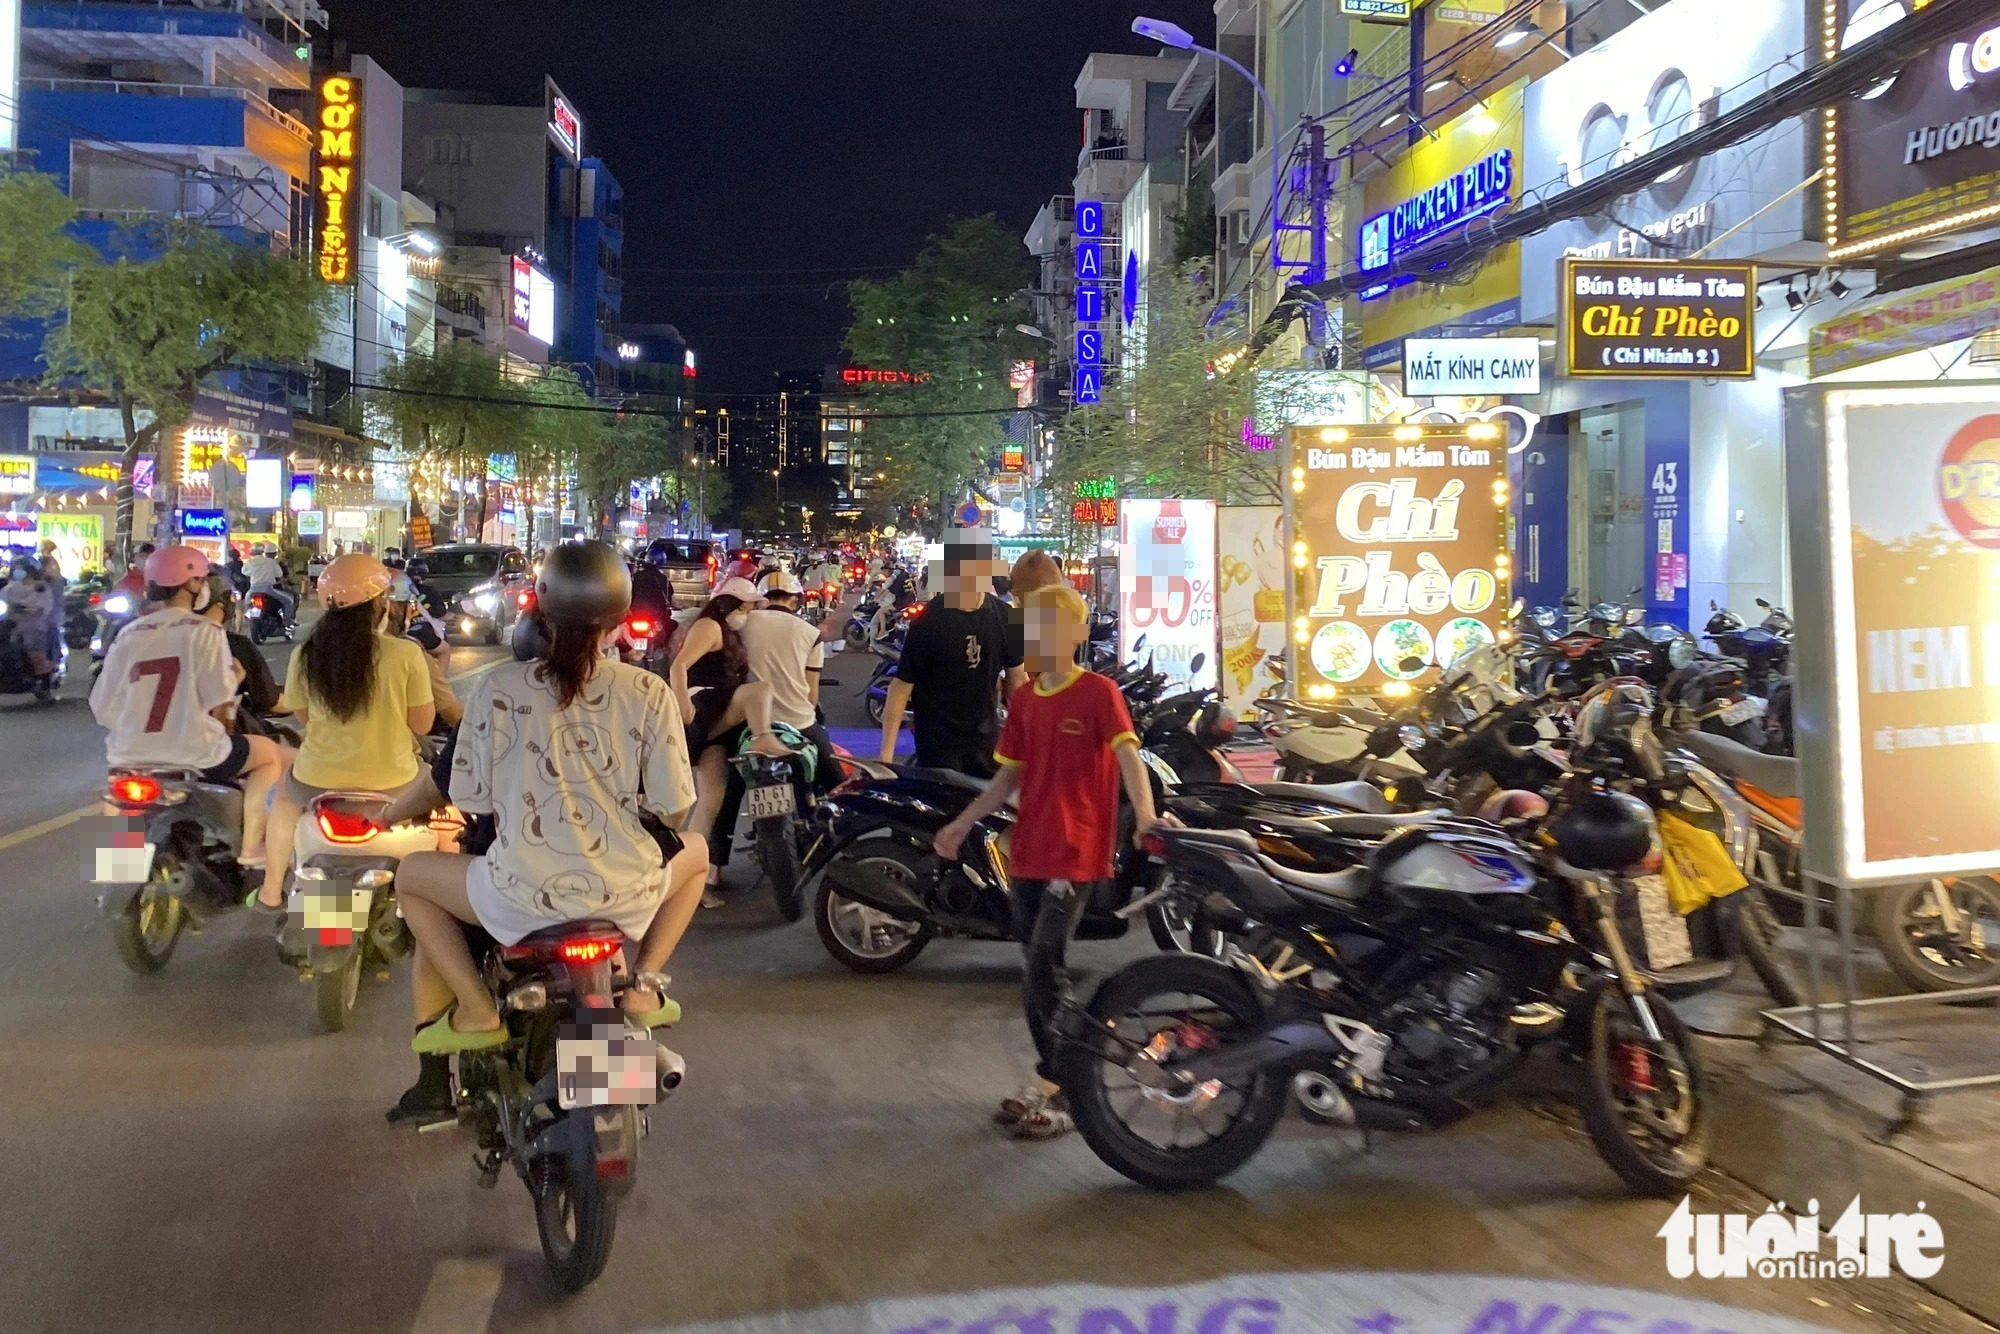 Many street vendors flock to the street to entice customers. Photo: Tien Quoc / Tuoi Tre